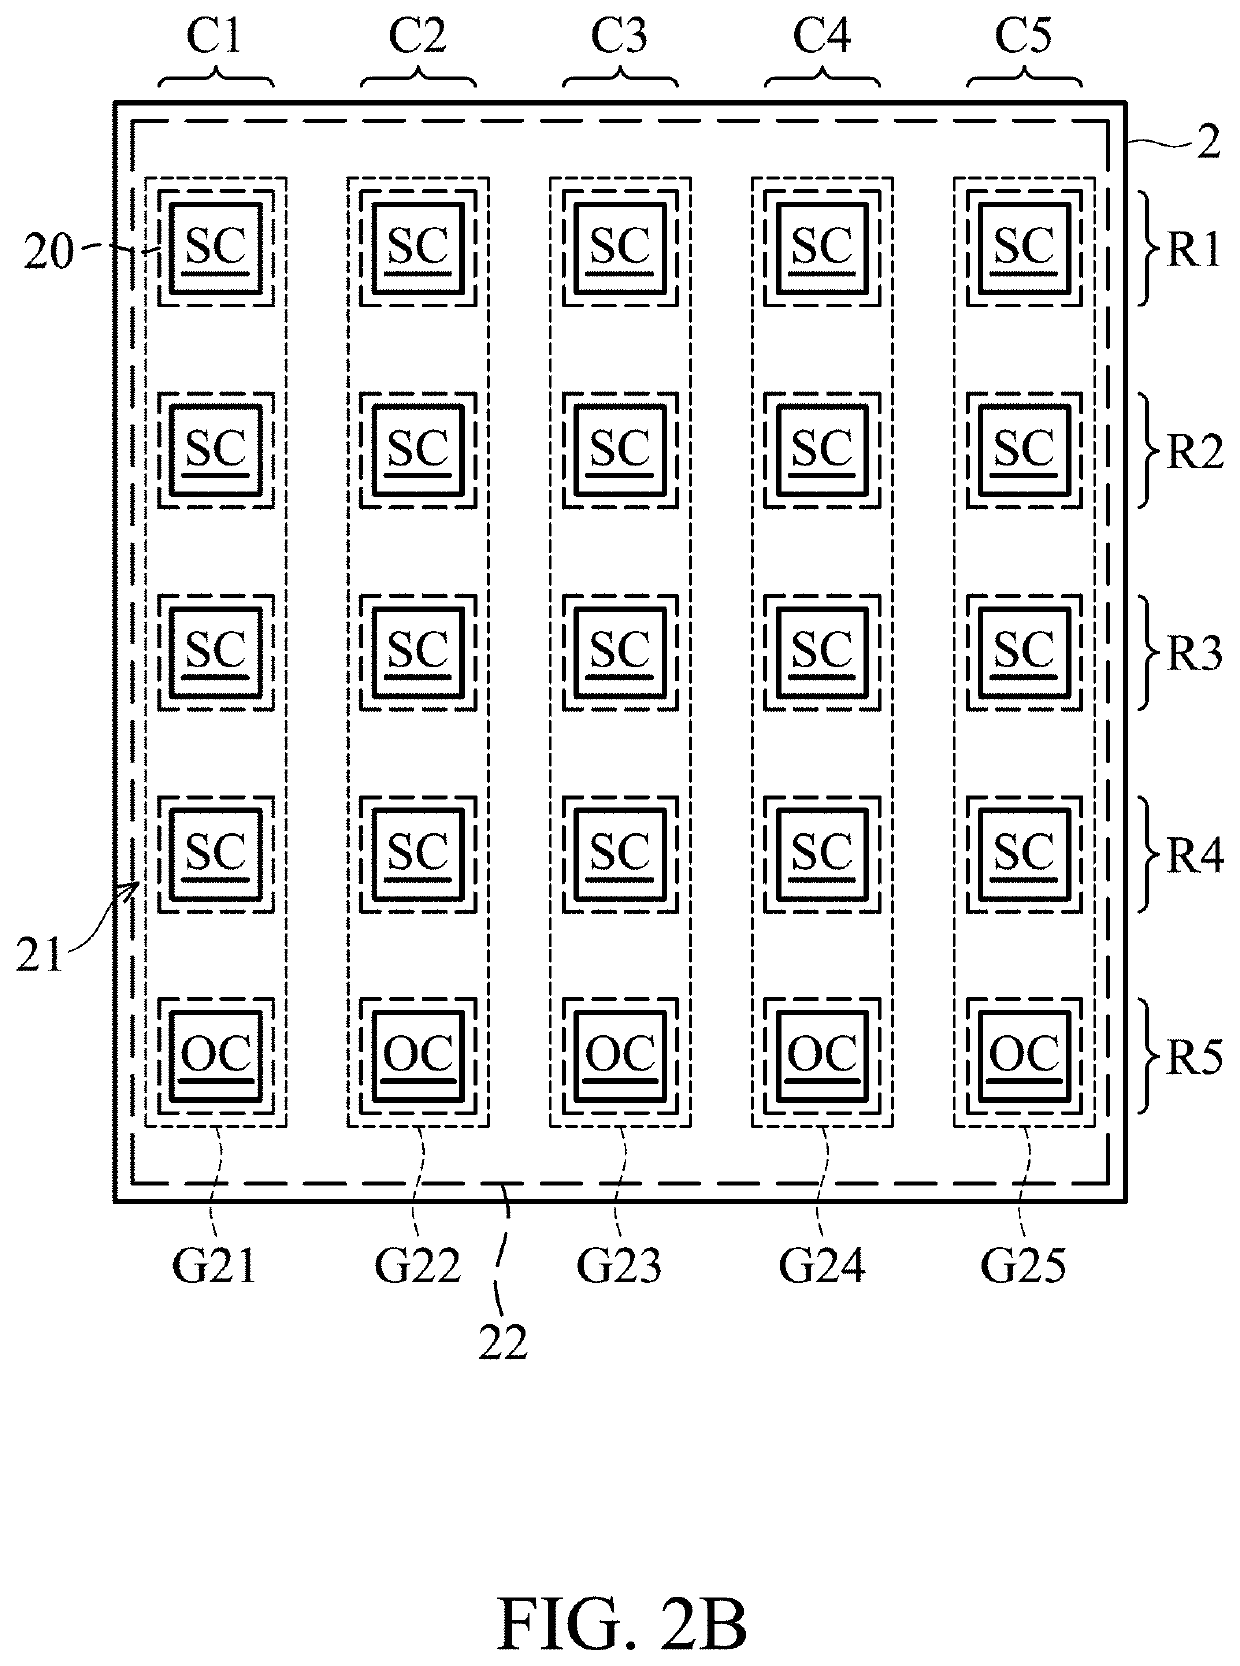 Active pixel sensor with sensing circuits and output circuits disposed on the same substrate